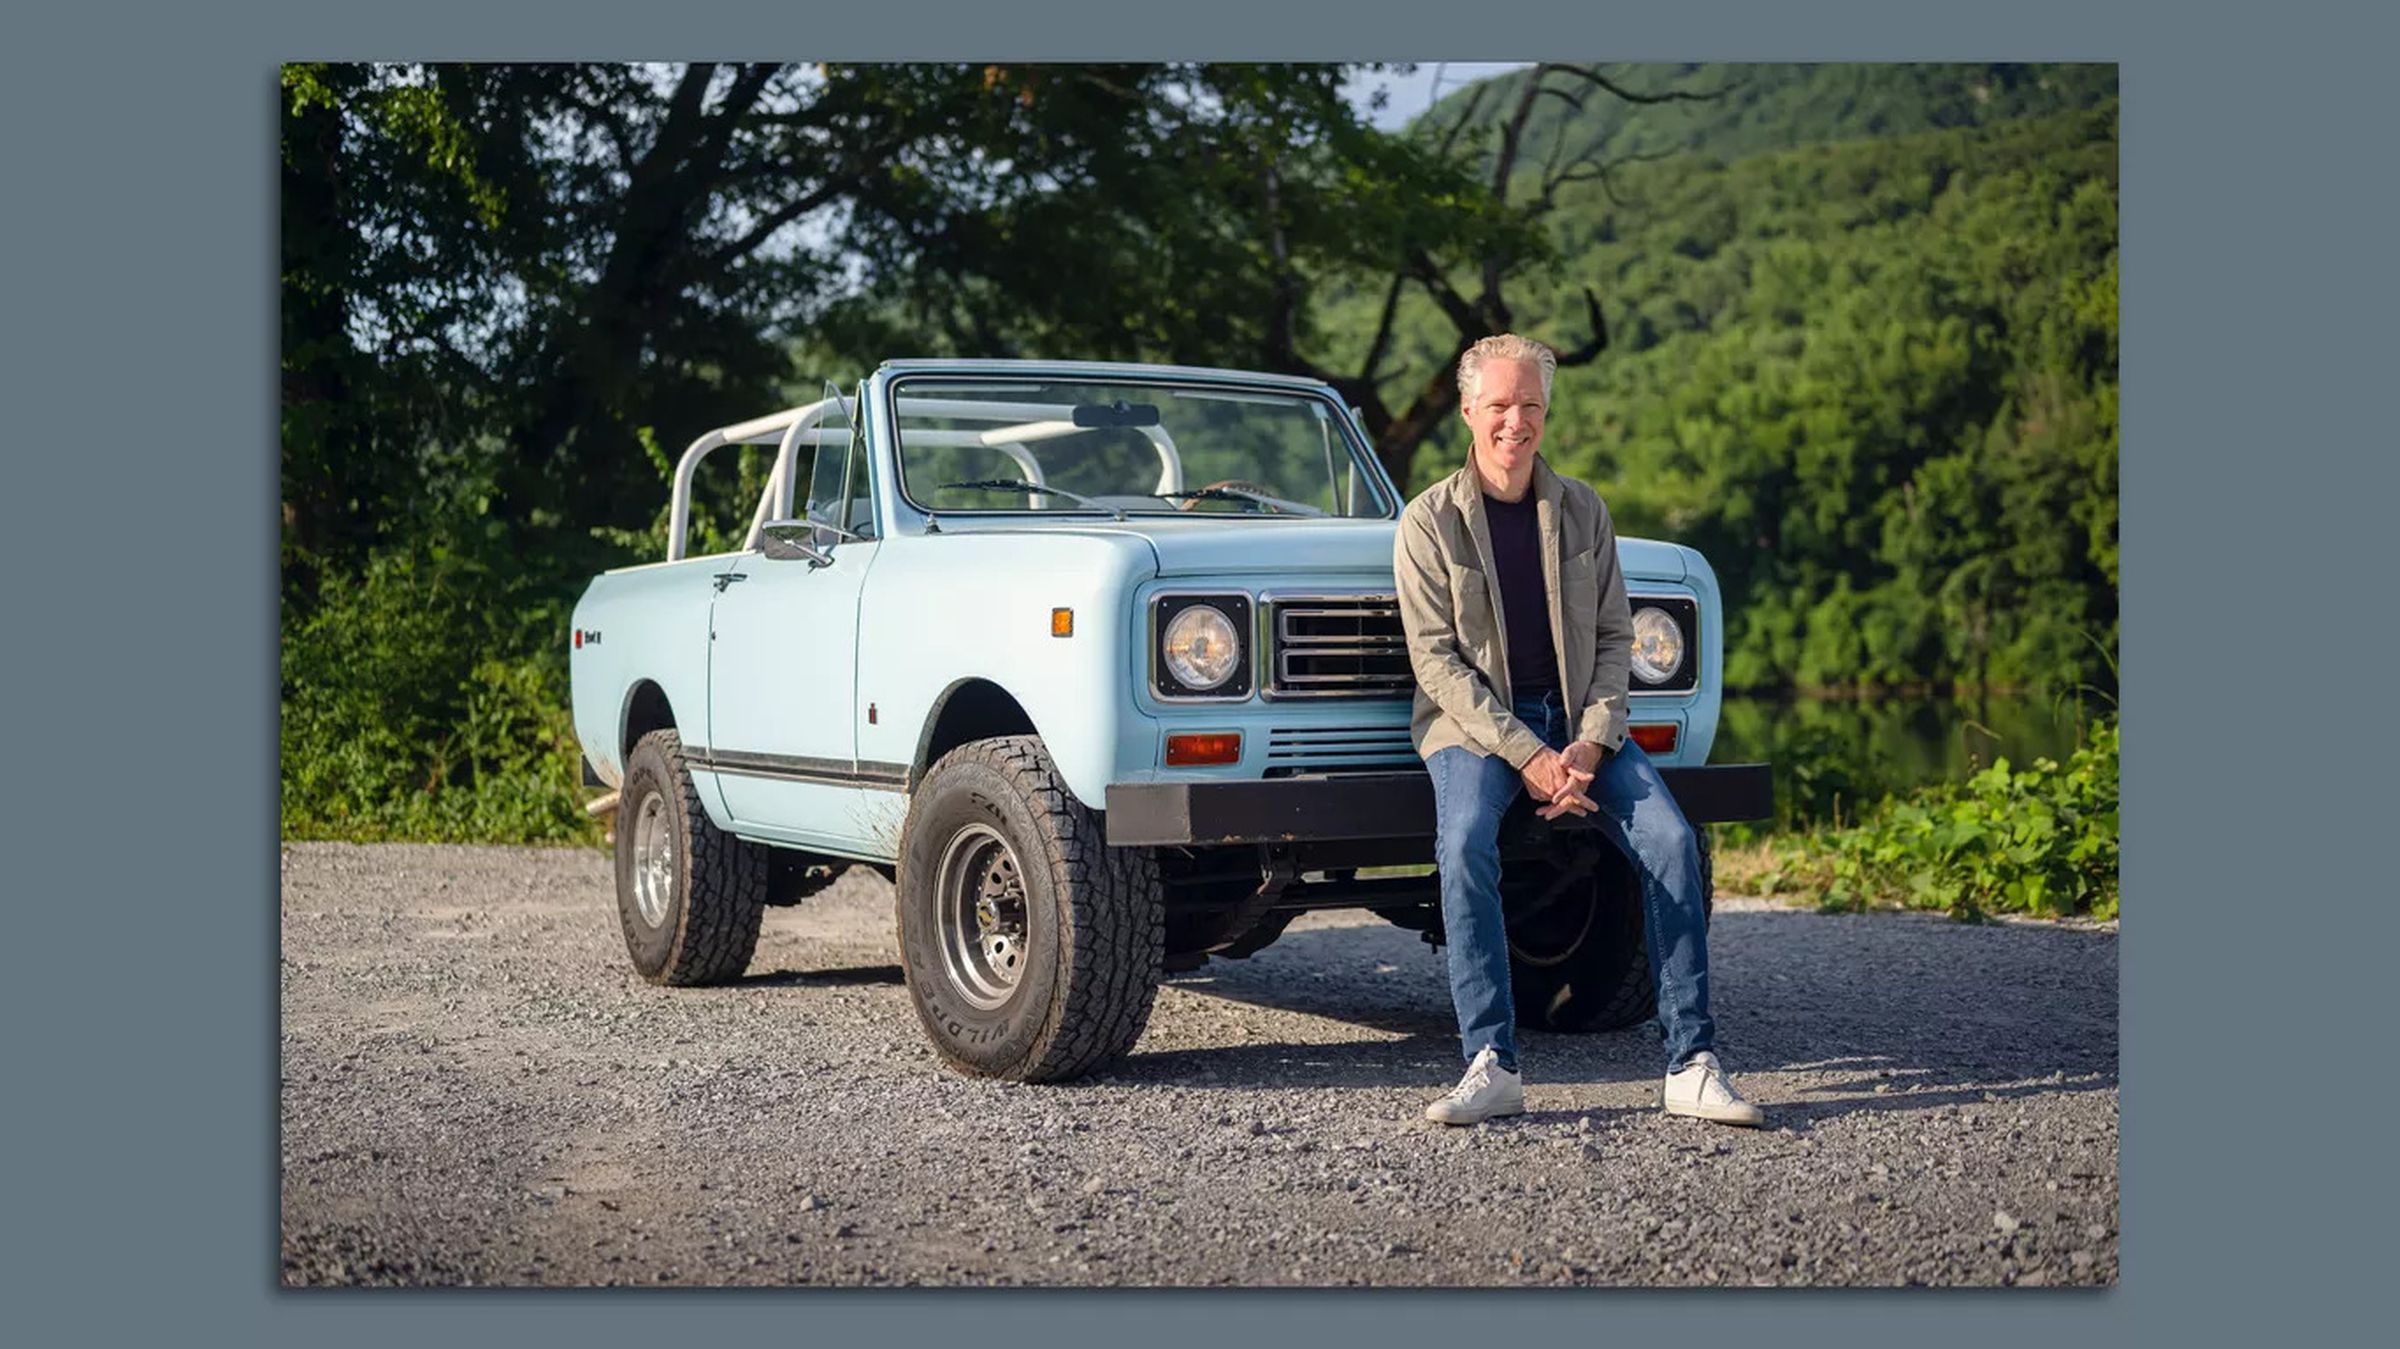 New Scout CEO and former head of Volkswagen Group America, Scott Keogh, stands in front of a classic International Harvester Scout vehicle.